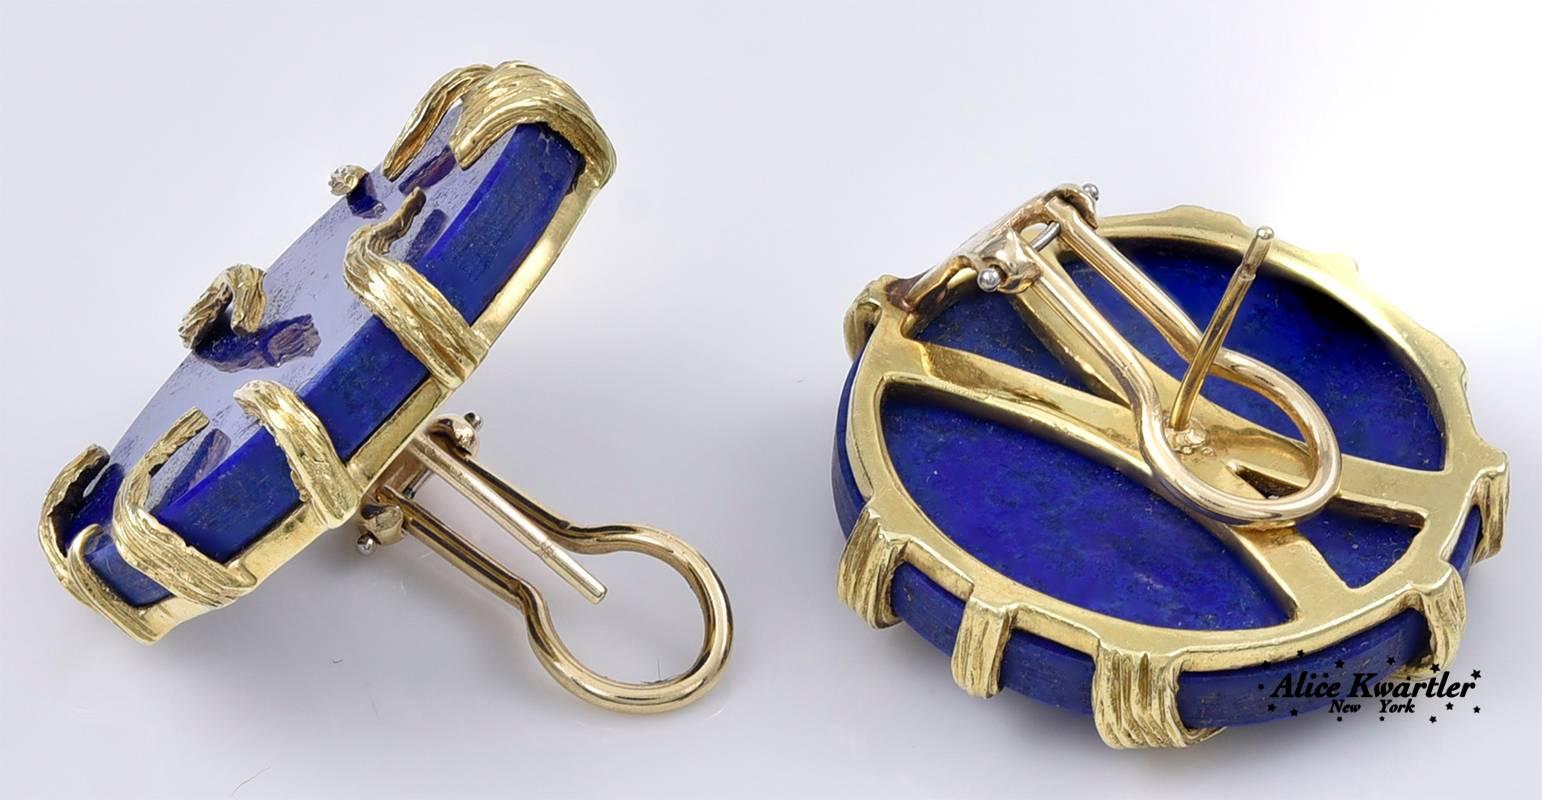 Chic lapis lazuli round earrings, with applied gold leaf motif. Good color lapis, with a lot of natural gold flecks.  1" in diameter.  14K yellow gold. Omega clips with posts.  A most interesting distinctive earring.

Alice Kwartler has sold